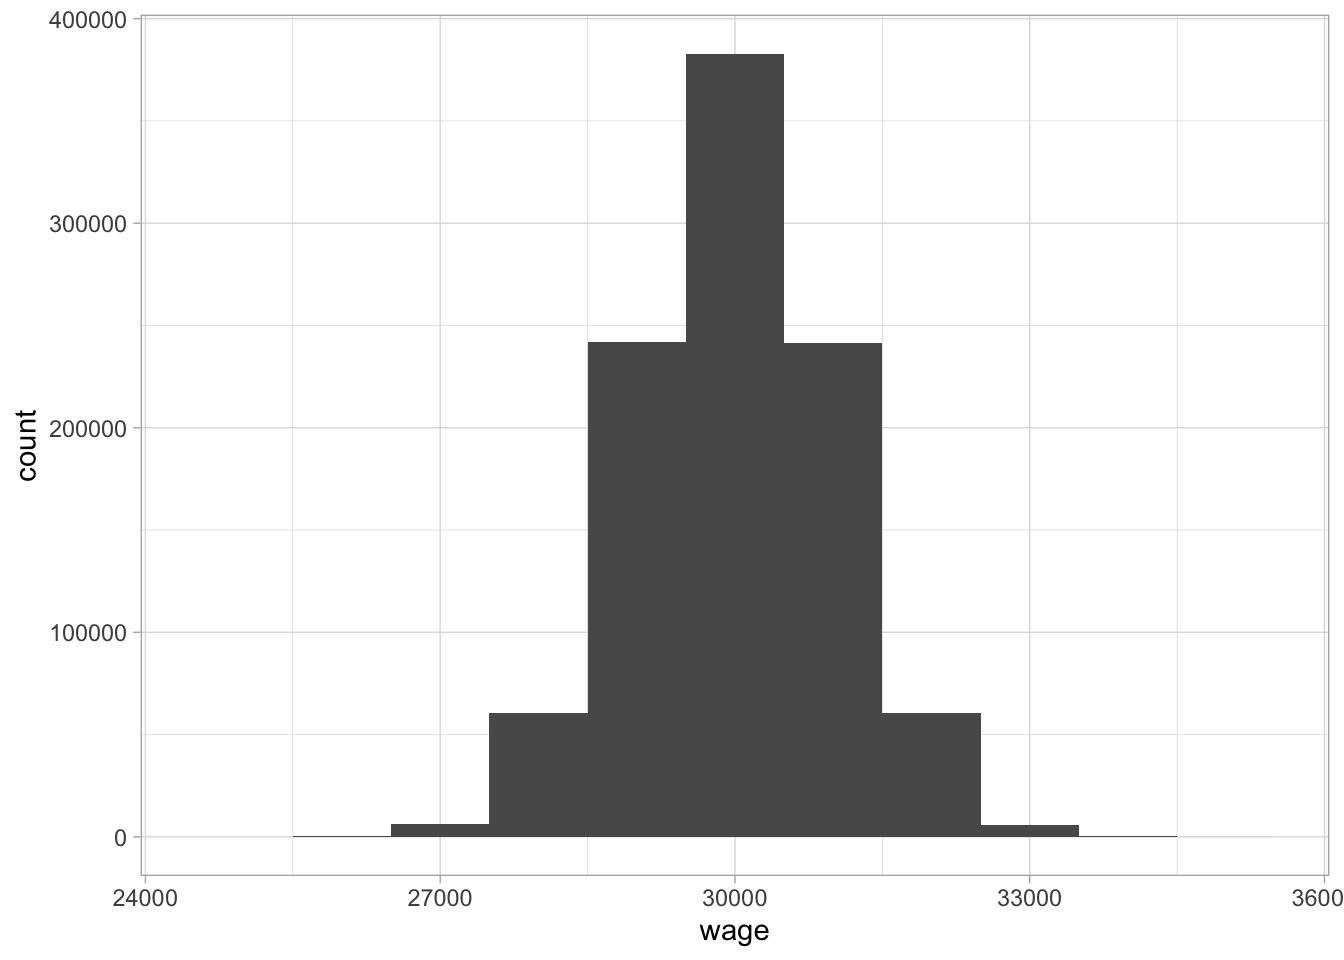 A histogram of wages with bin width 1000.